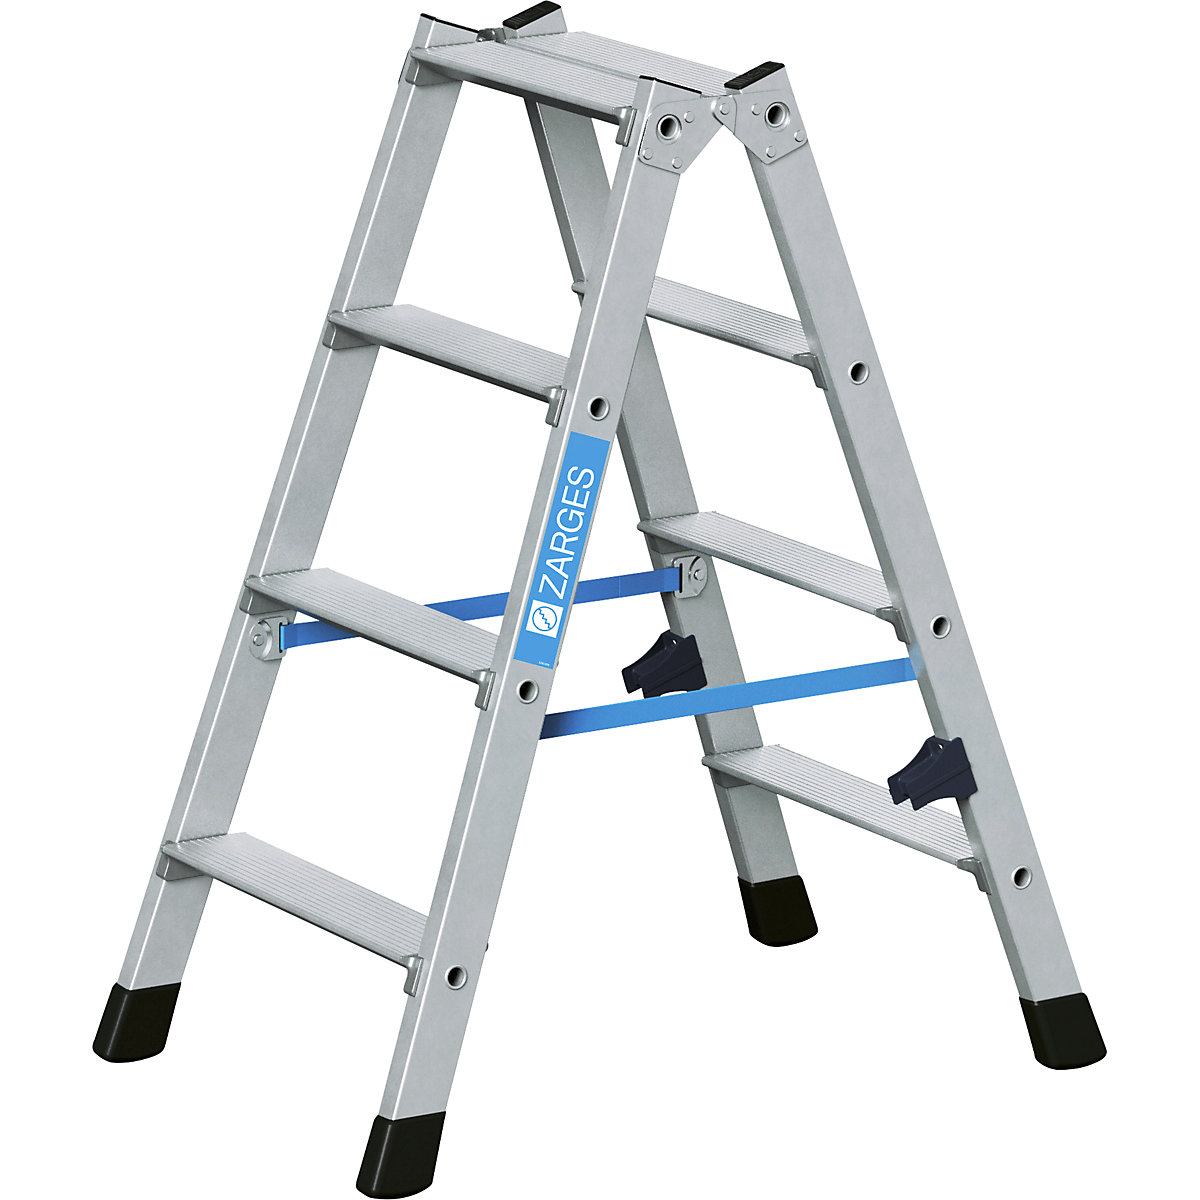 Aluminium step ladder, double sided access – ZARGES, robust steel hinges, 2 x 4 steps-3